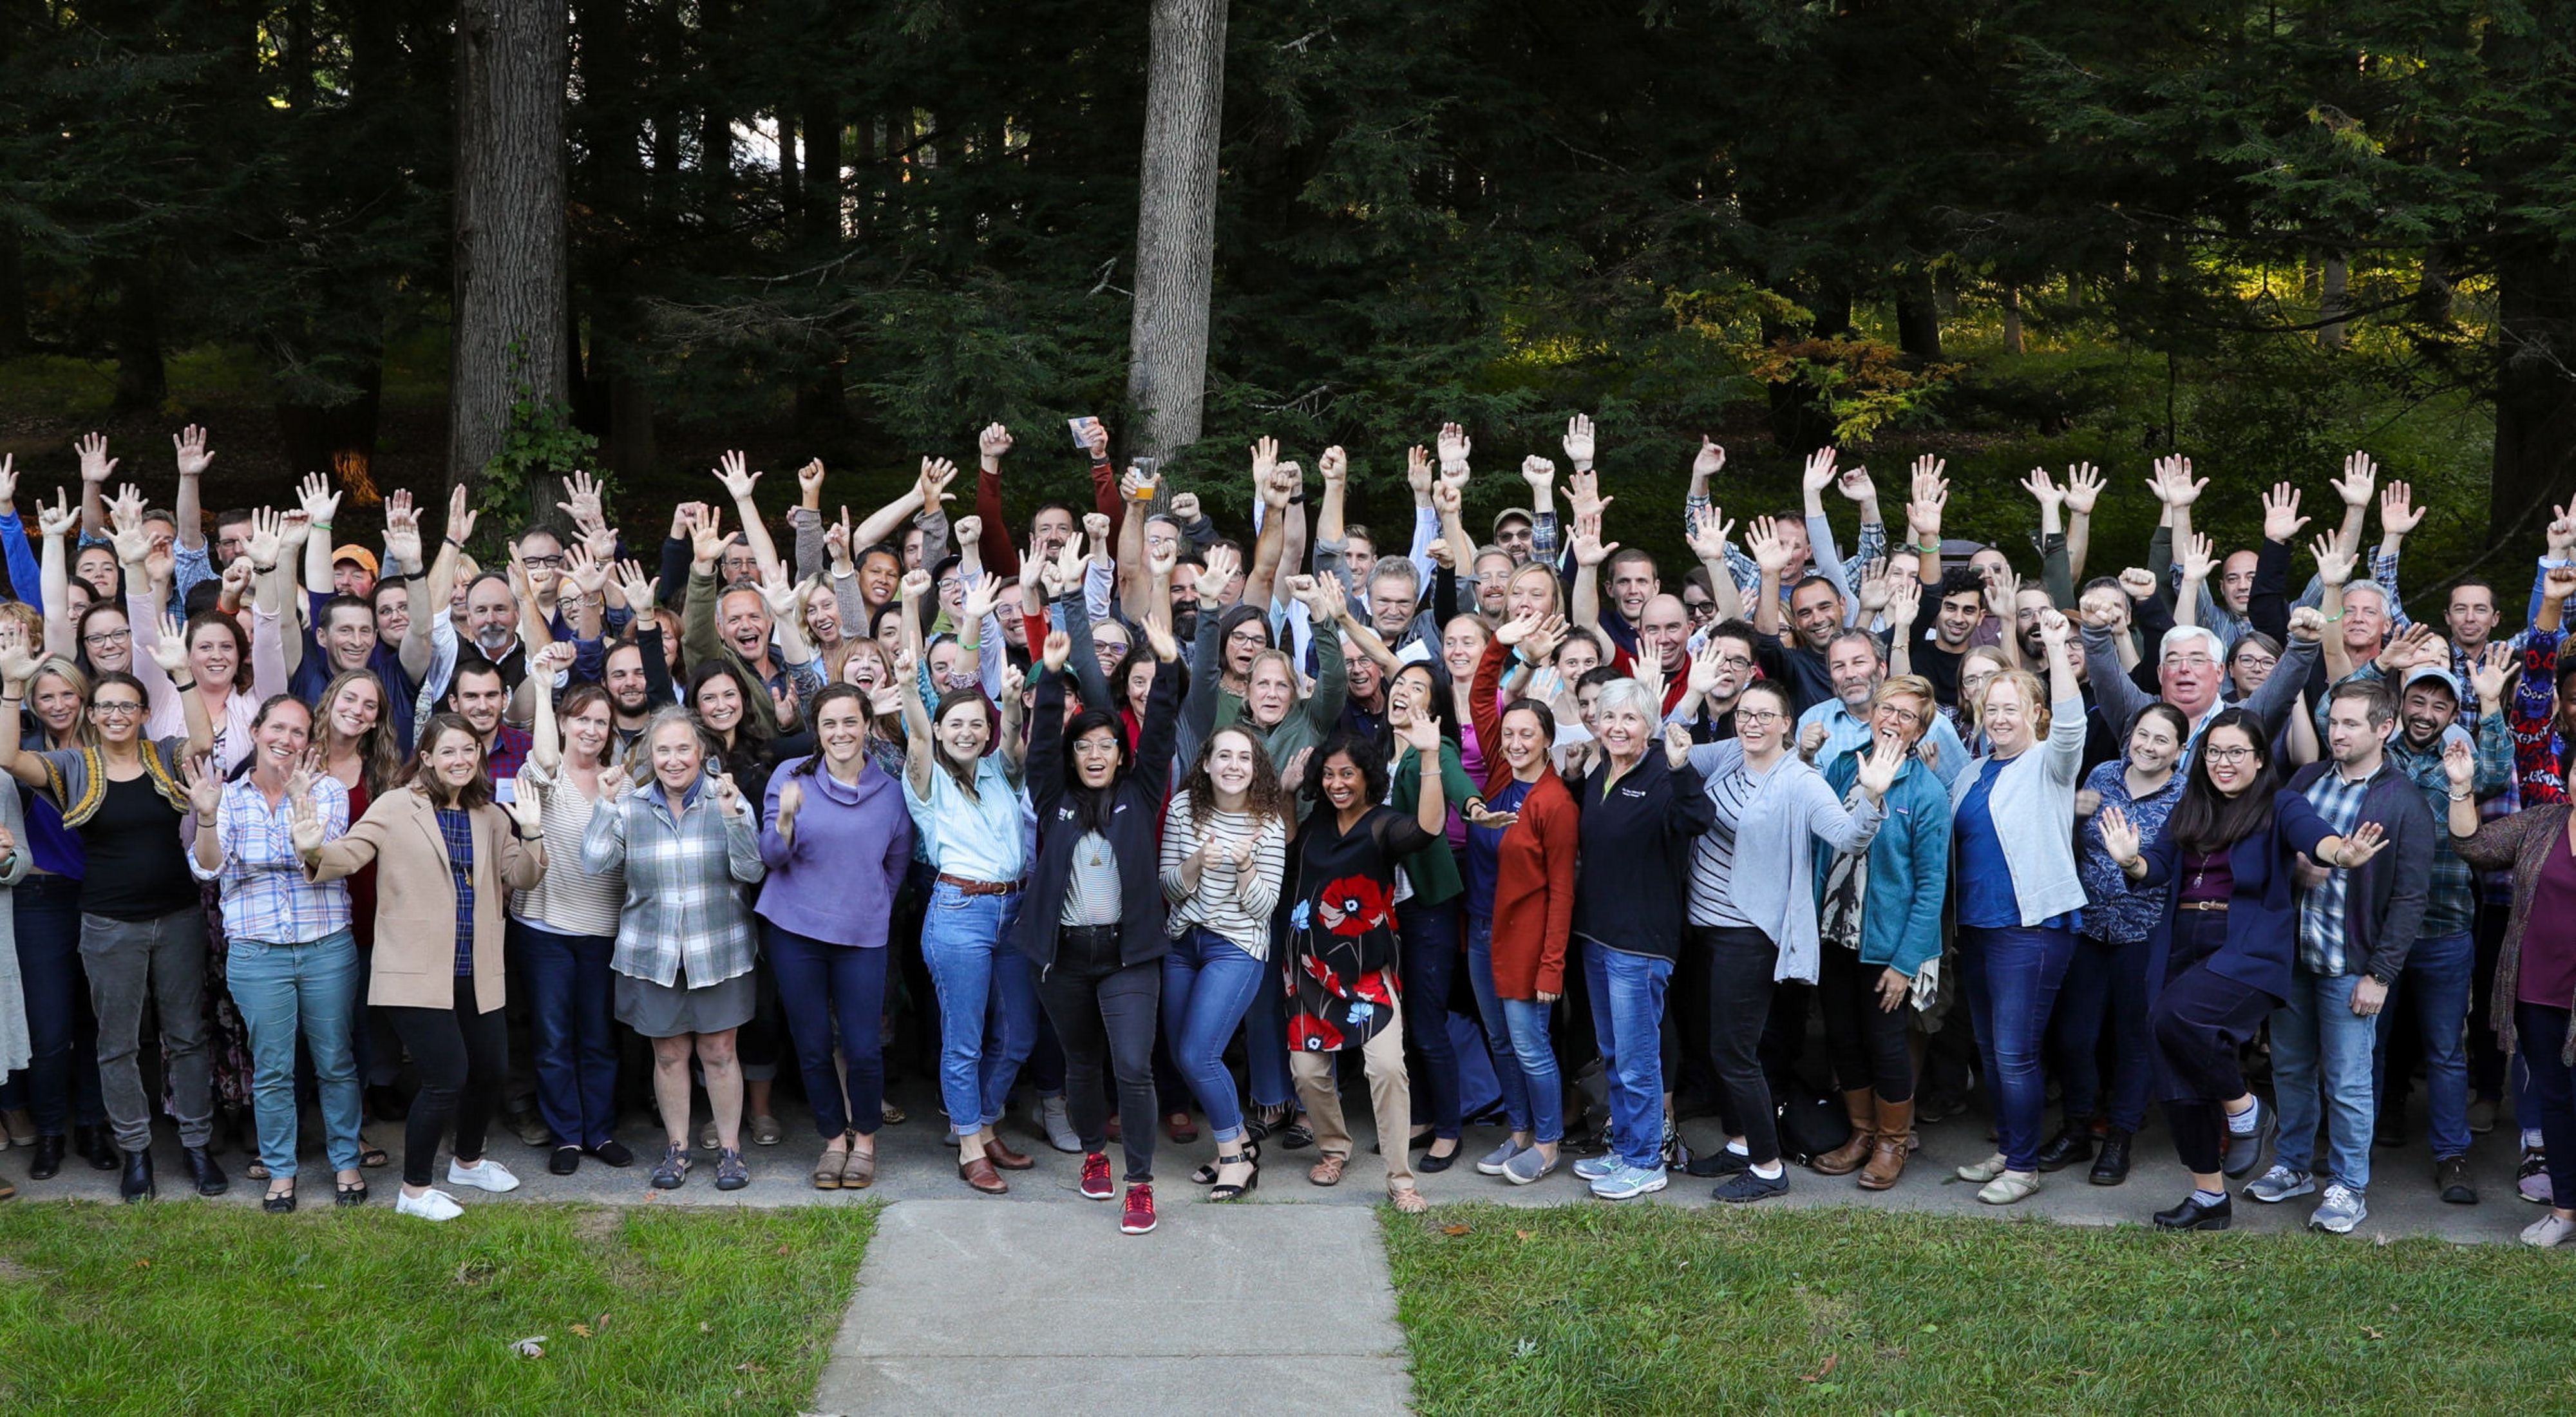 Group picture of TNC staff in an outdoor setting smiling at camera with arms raised.